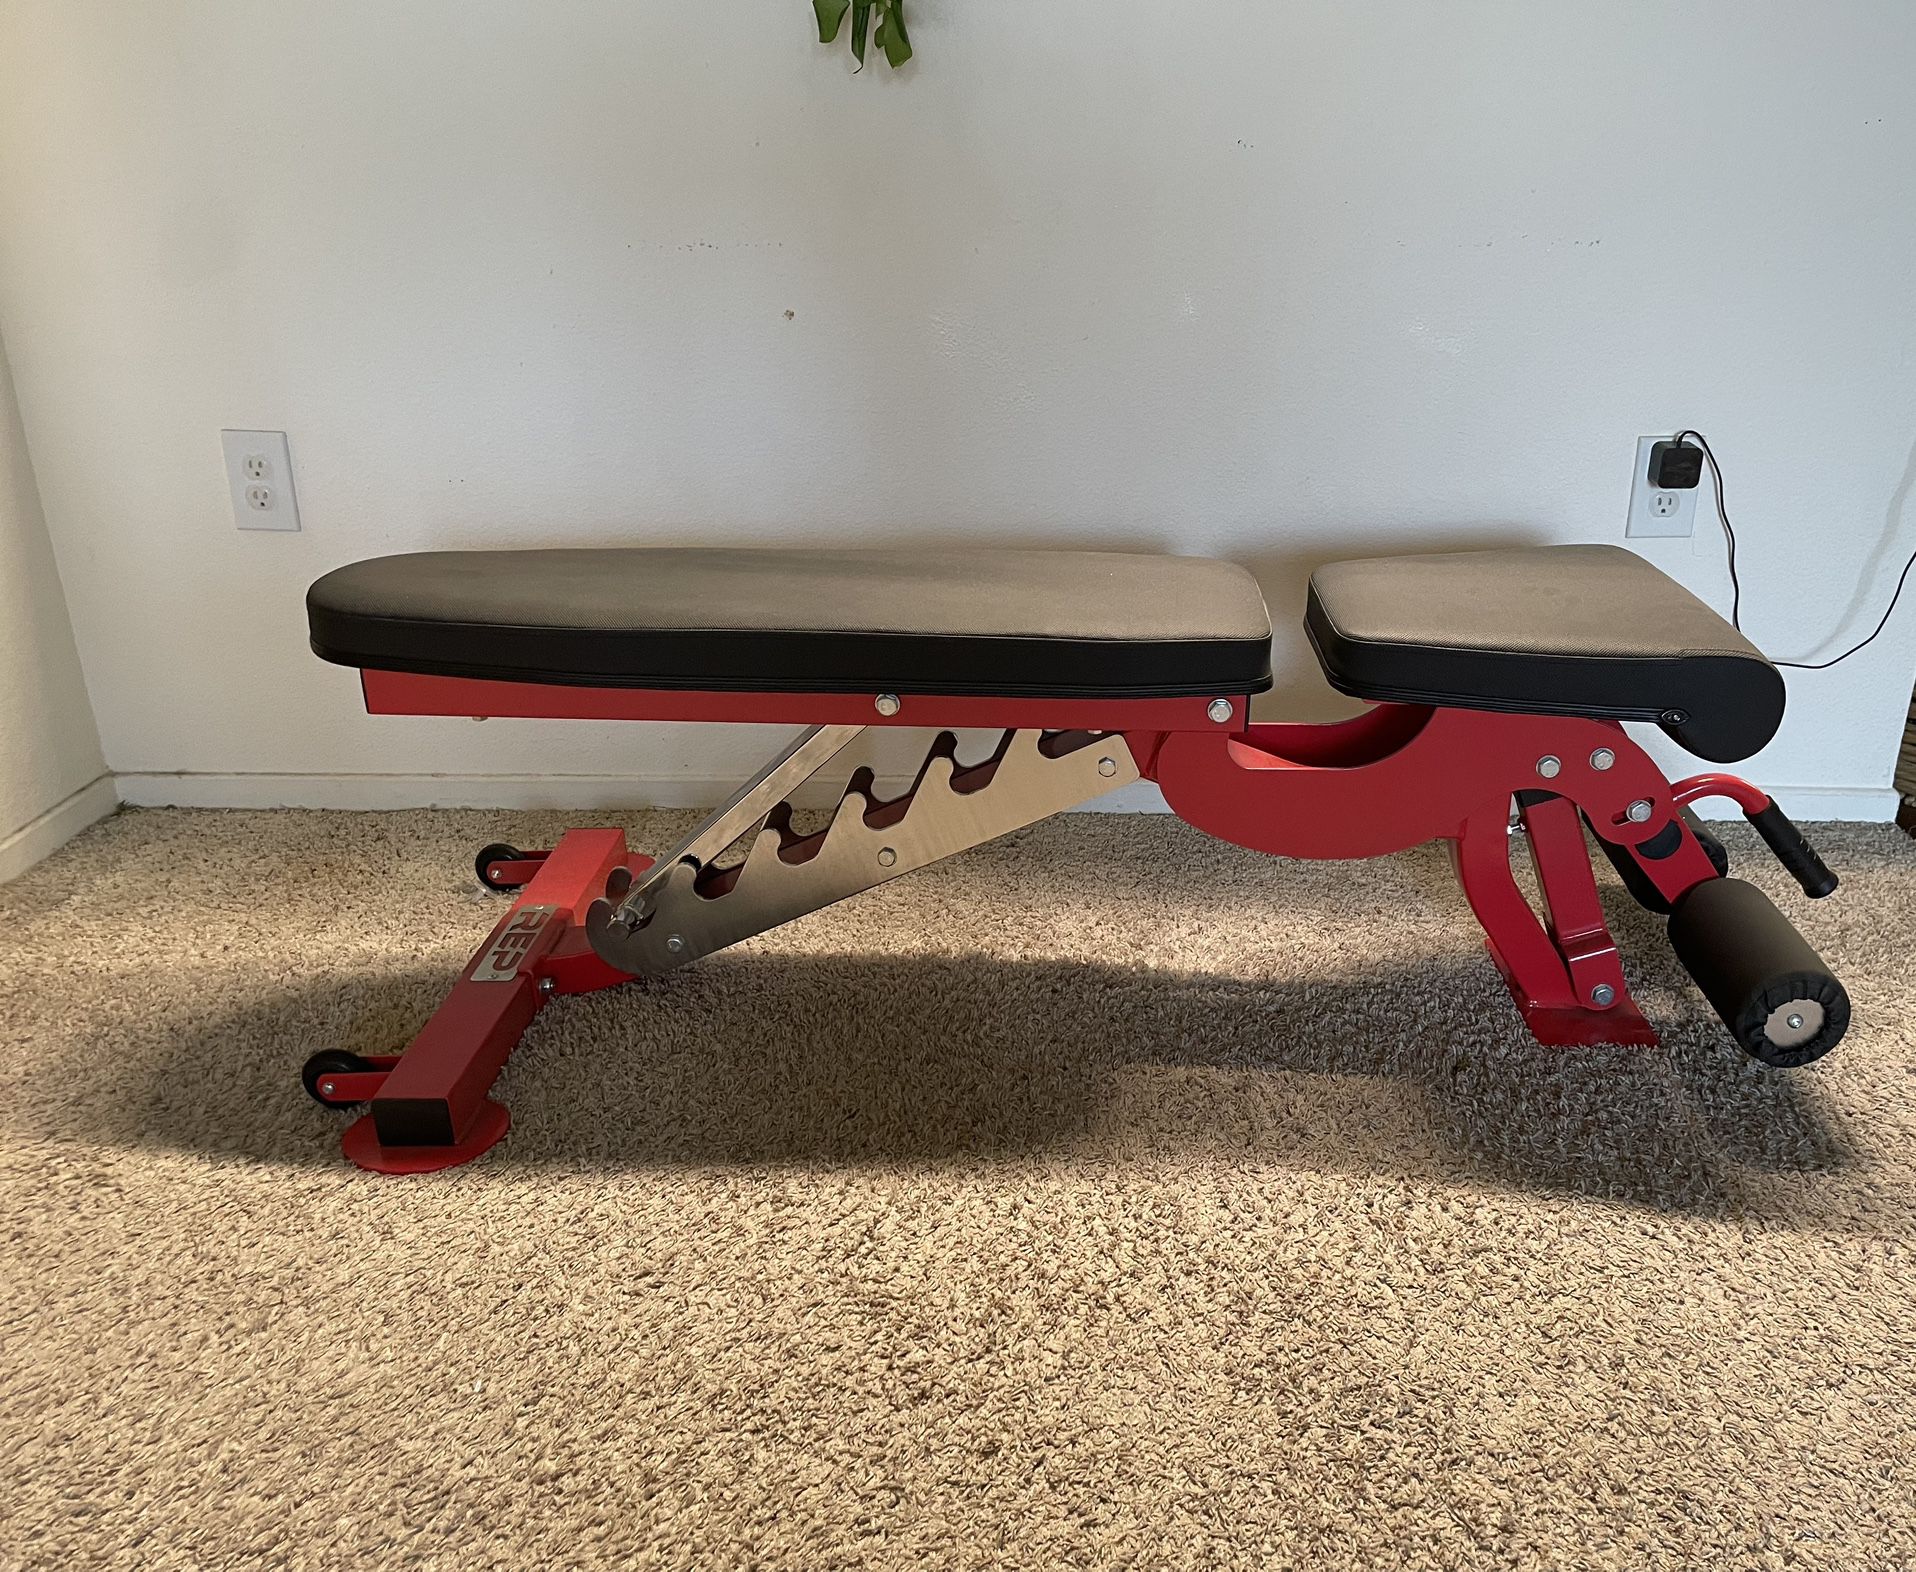 Rep Fitness Incline / Decline Bench 